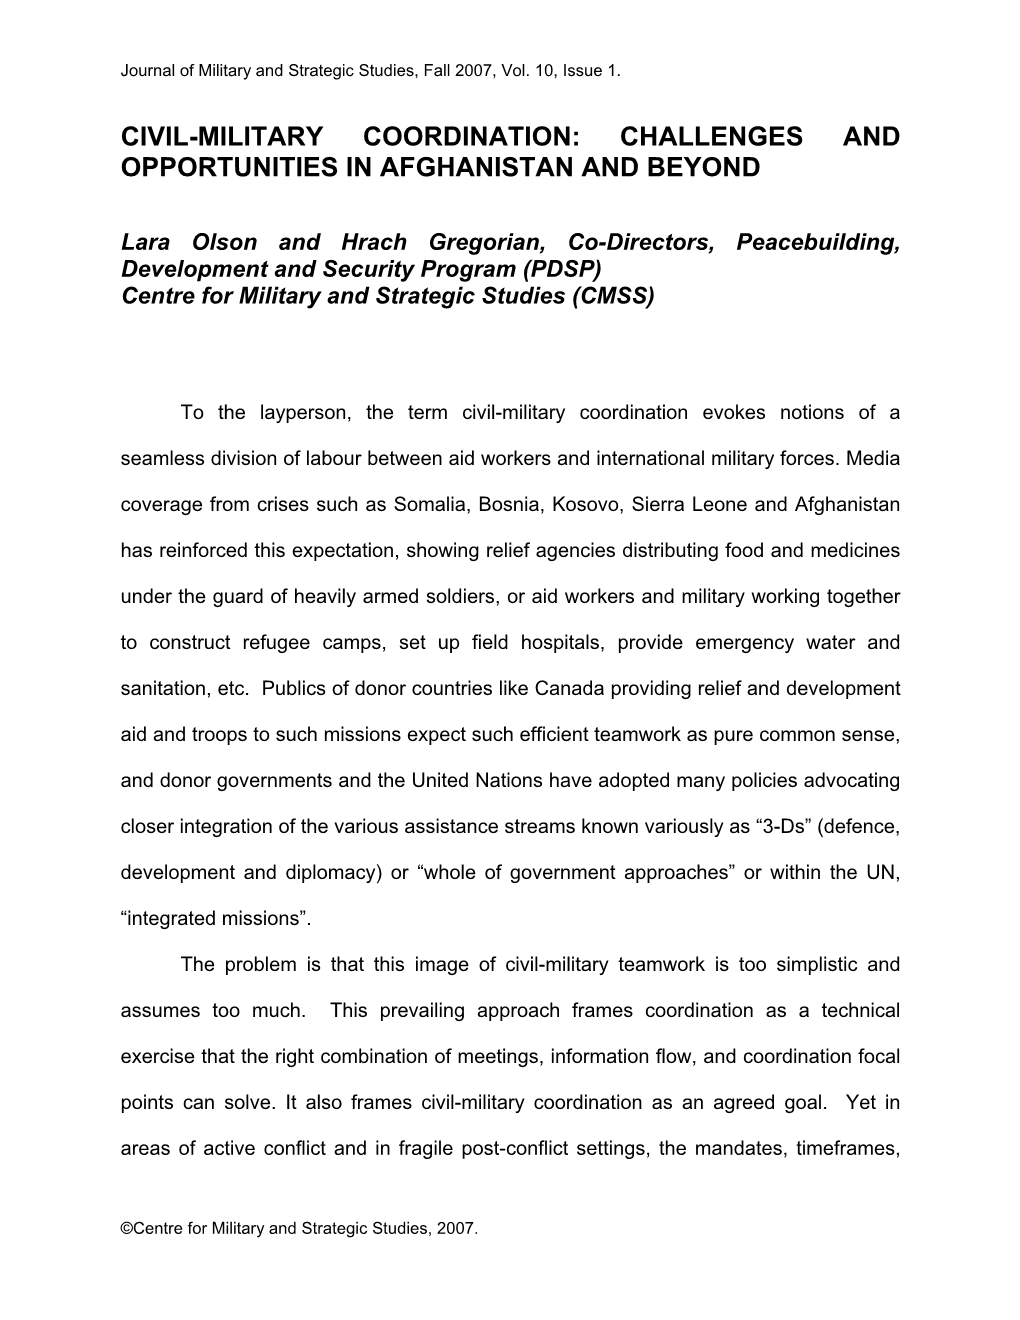 Civil-Military Coordination: Challenges and Opportunities in Afghanistan and Beyond